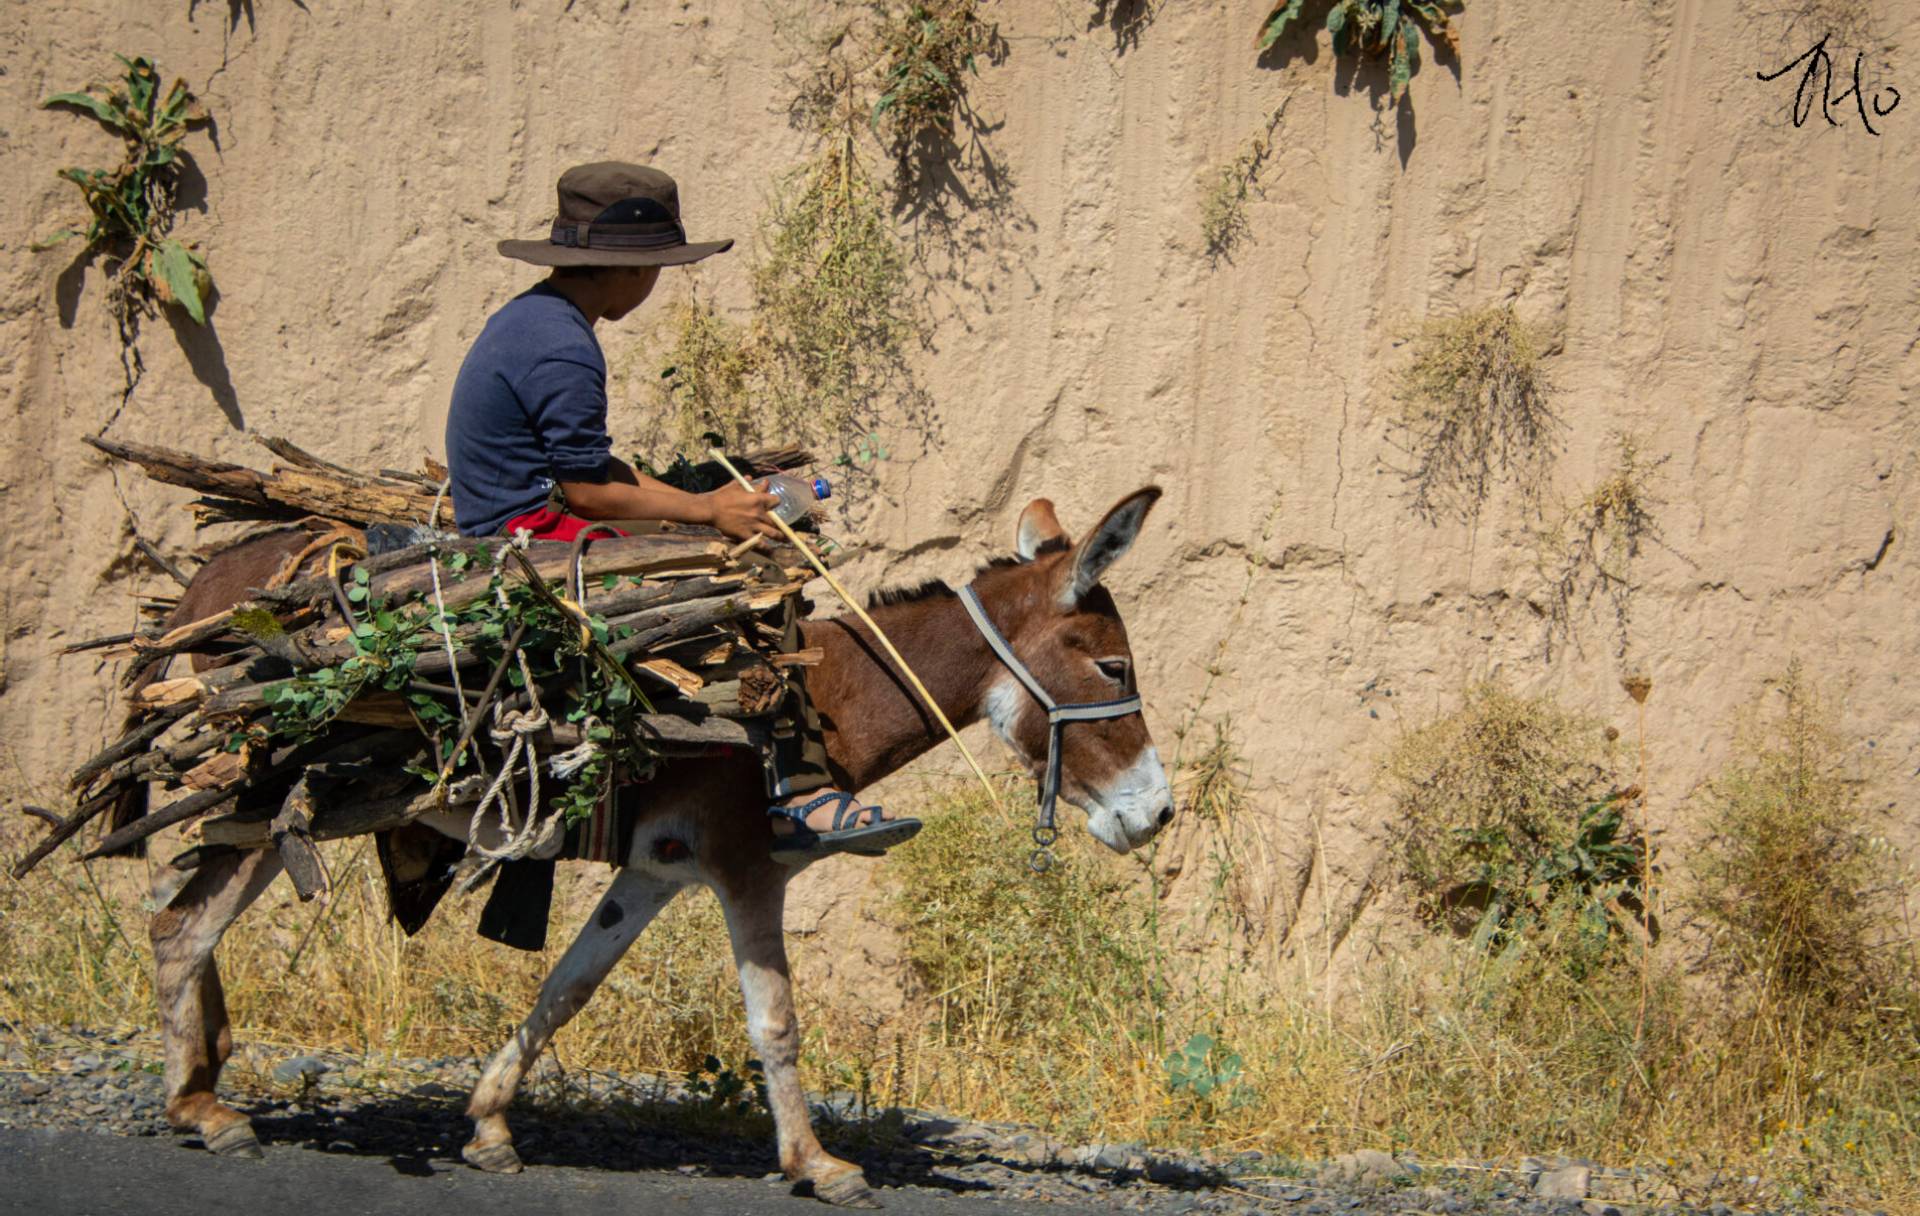 A man riding a donkey with sticks on his back.